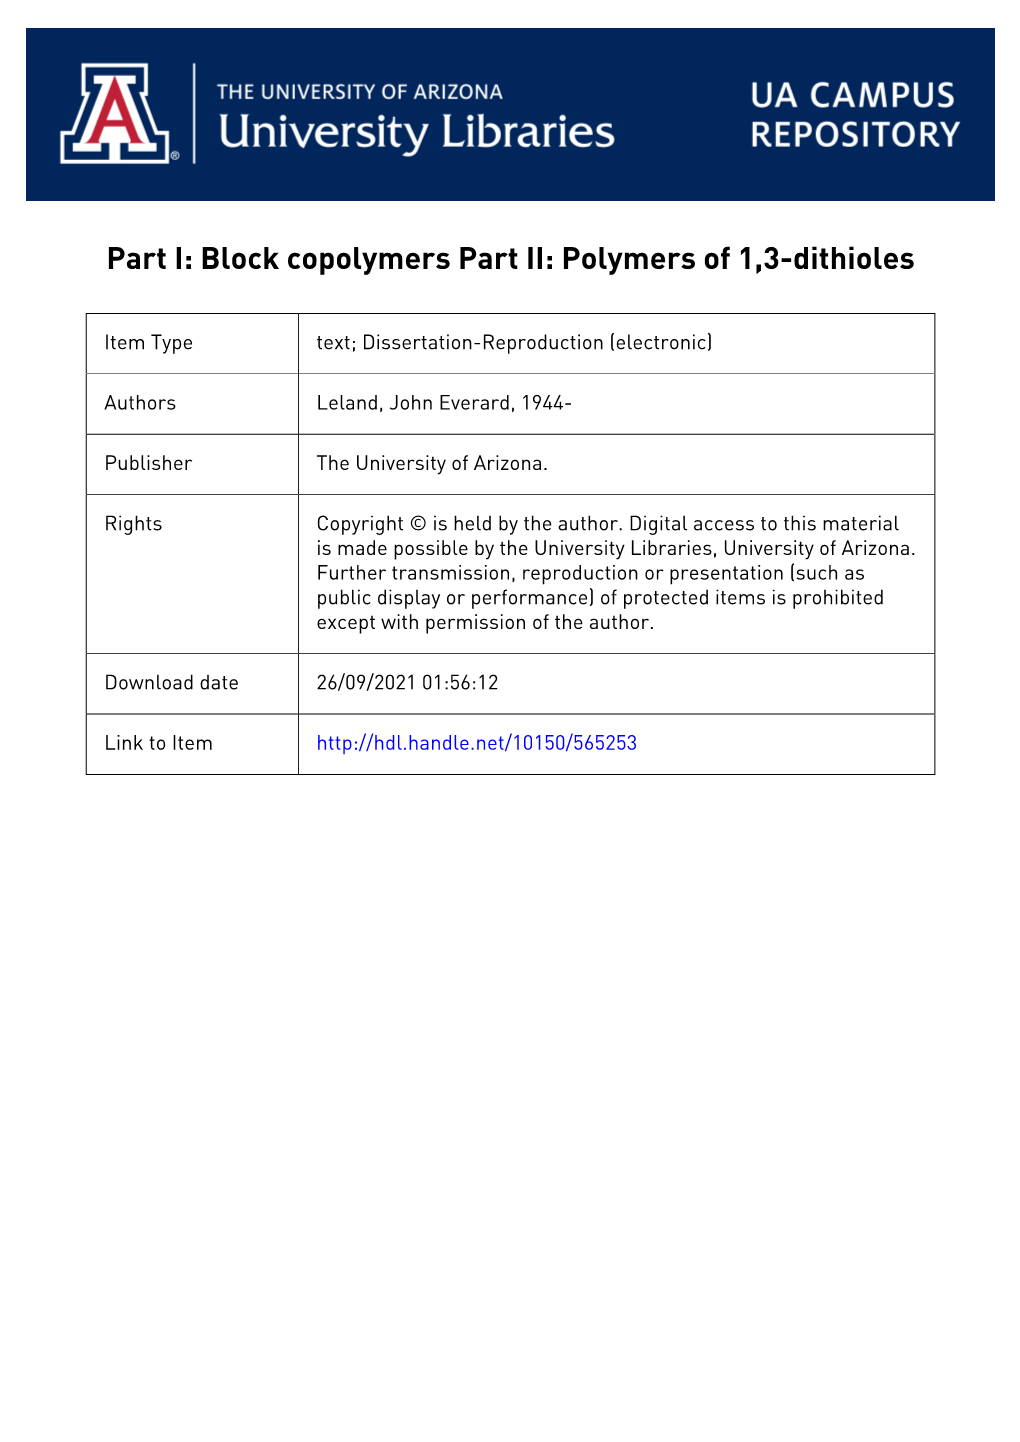 Part I Block Copolymers Part Ii Polymers of 1,3